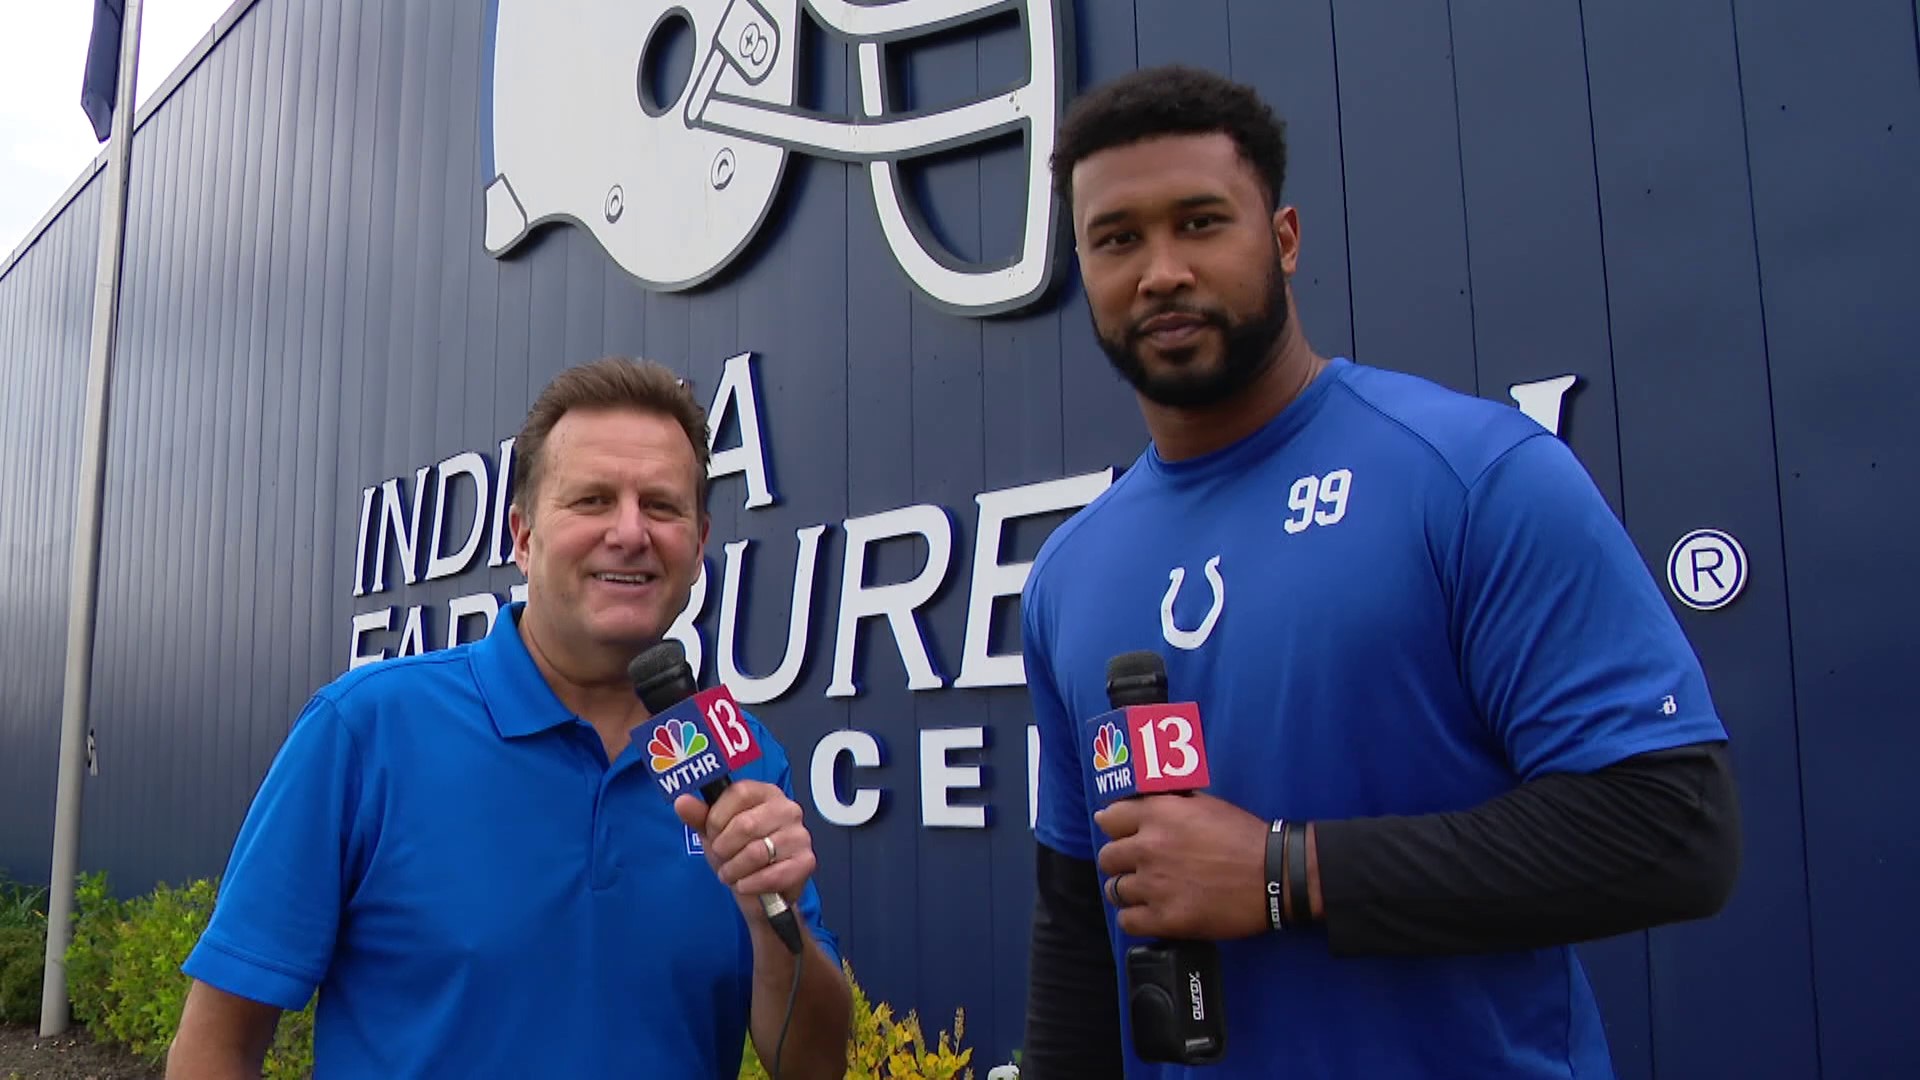 13Sports director Dave Calabro talks with Indianapolis Colts defensive end DeForest Buckner ahead of the Colts matchup against the New Orleans Saints.